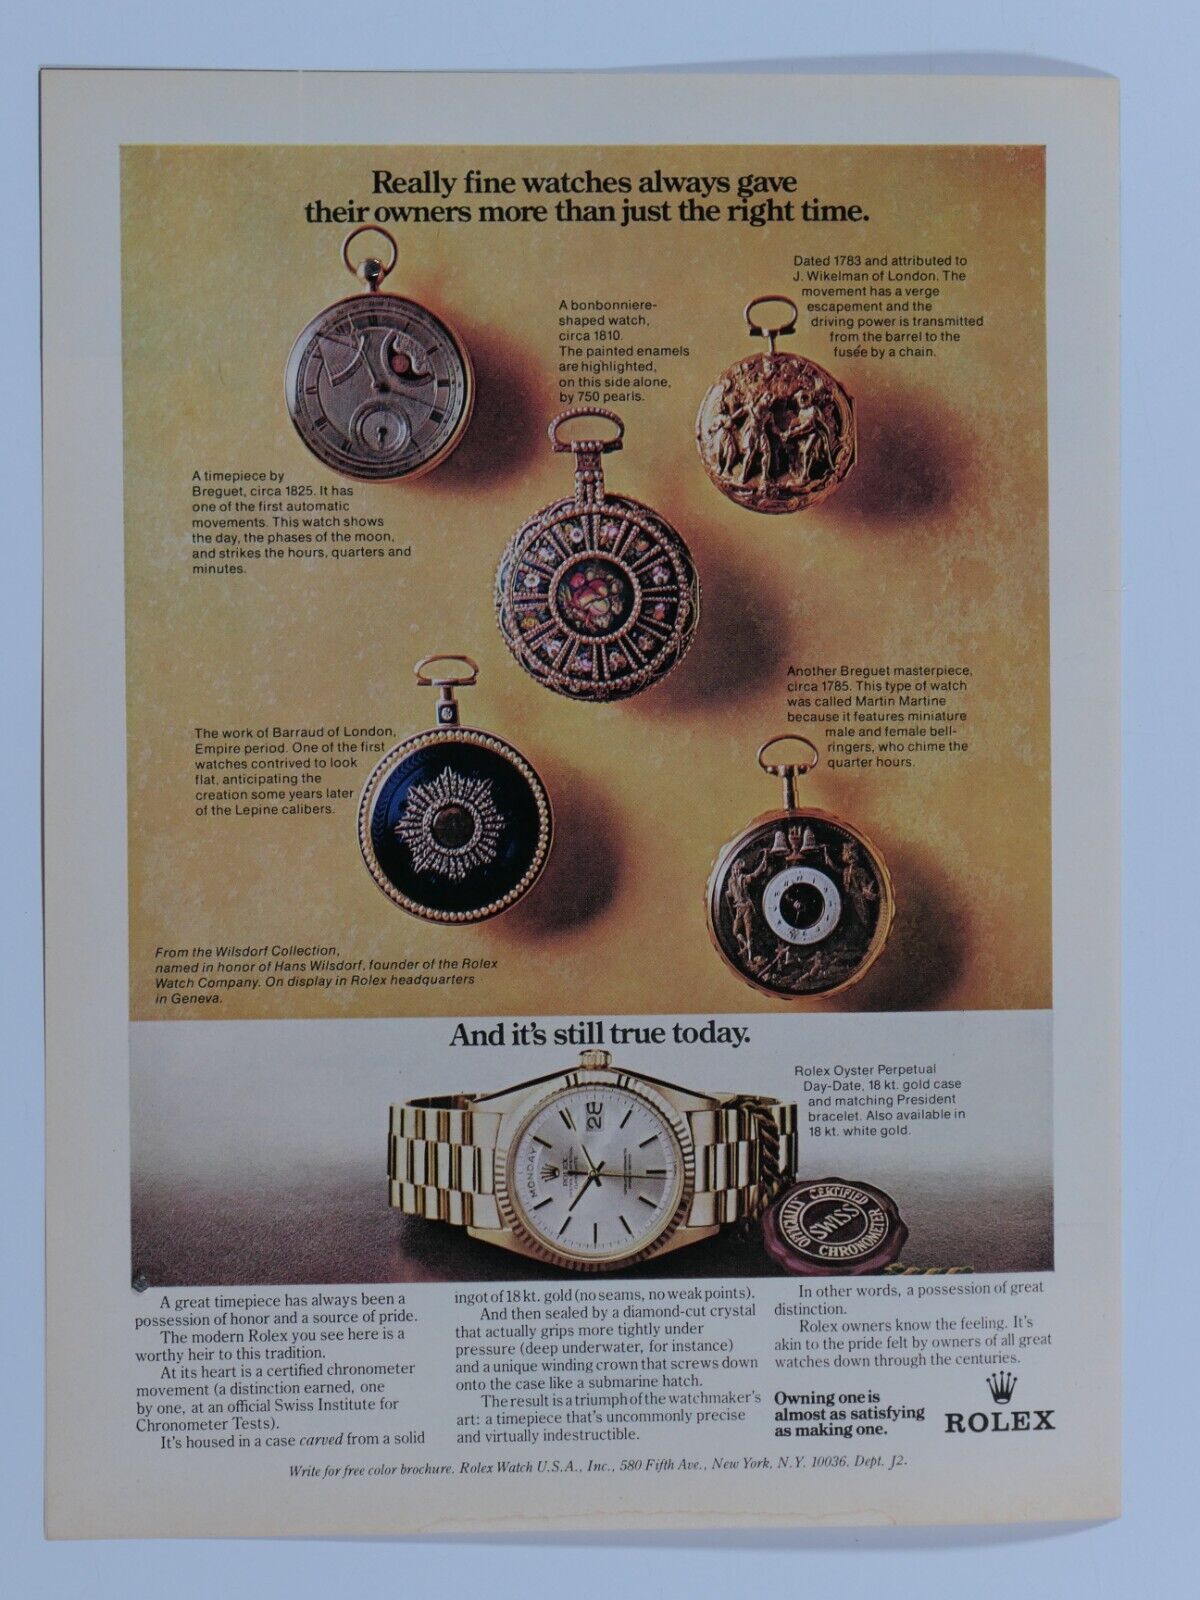 Rolex Vintage 1973 Really Fine Watches From Past Original Print Ad 8.5 x 11\